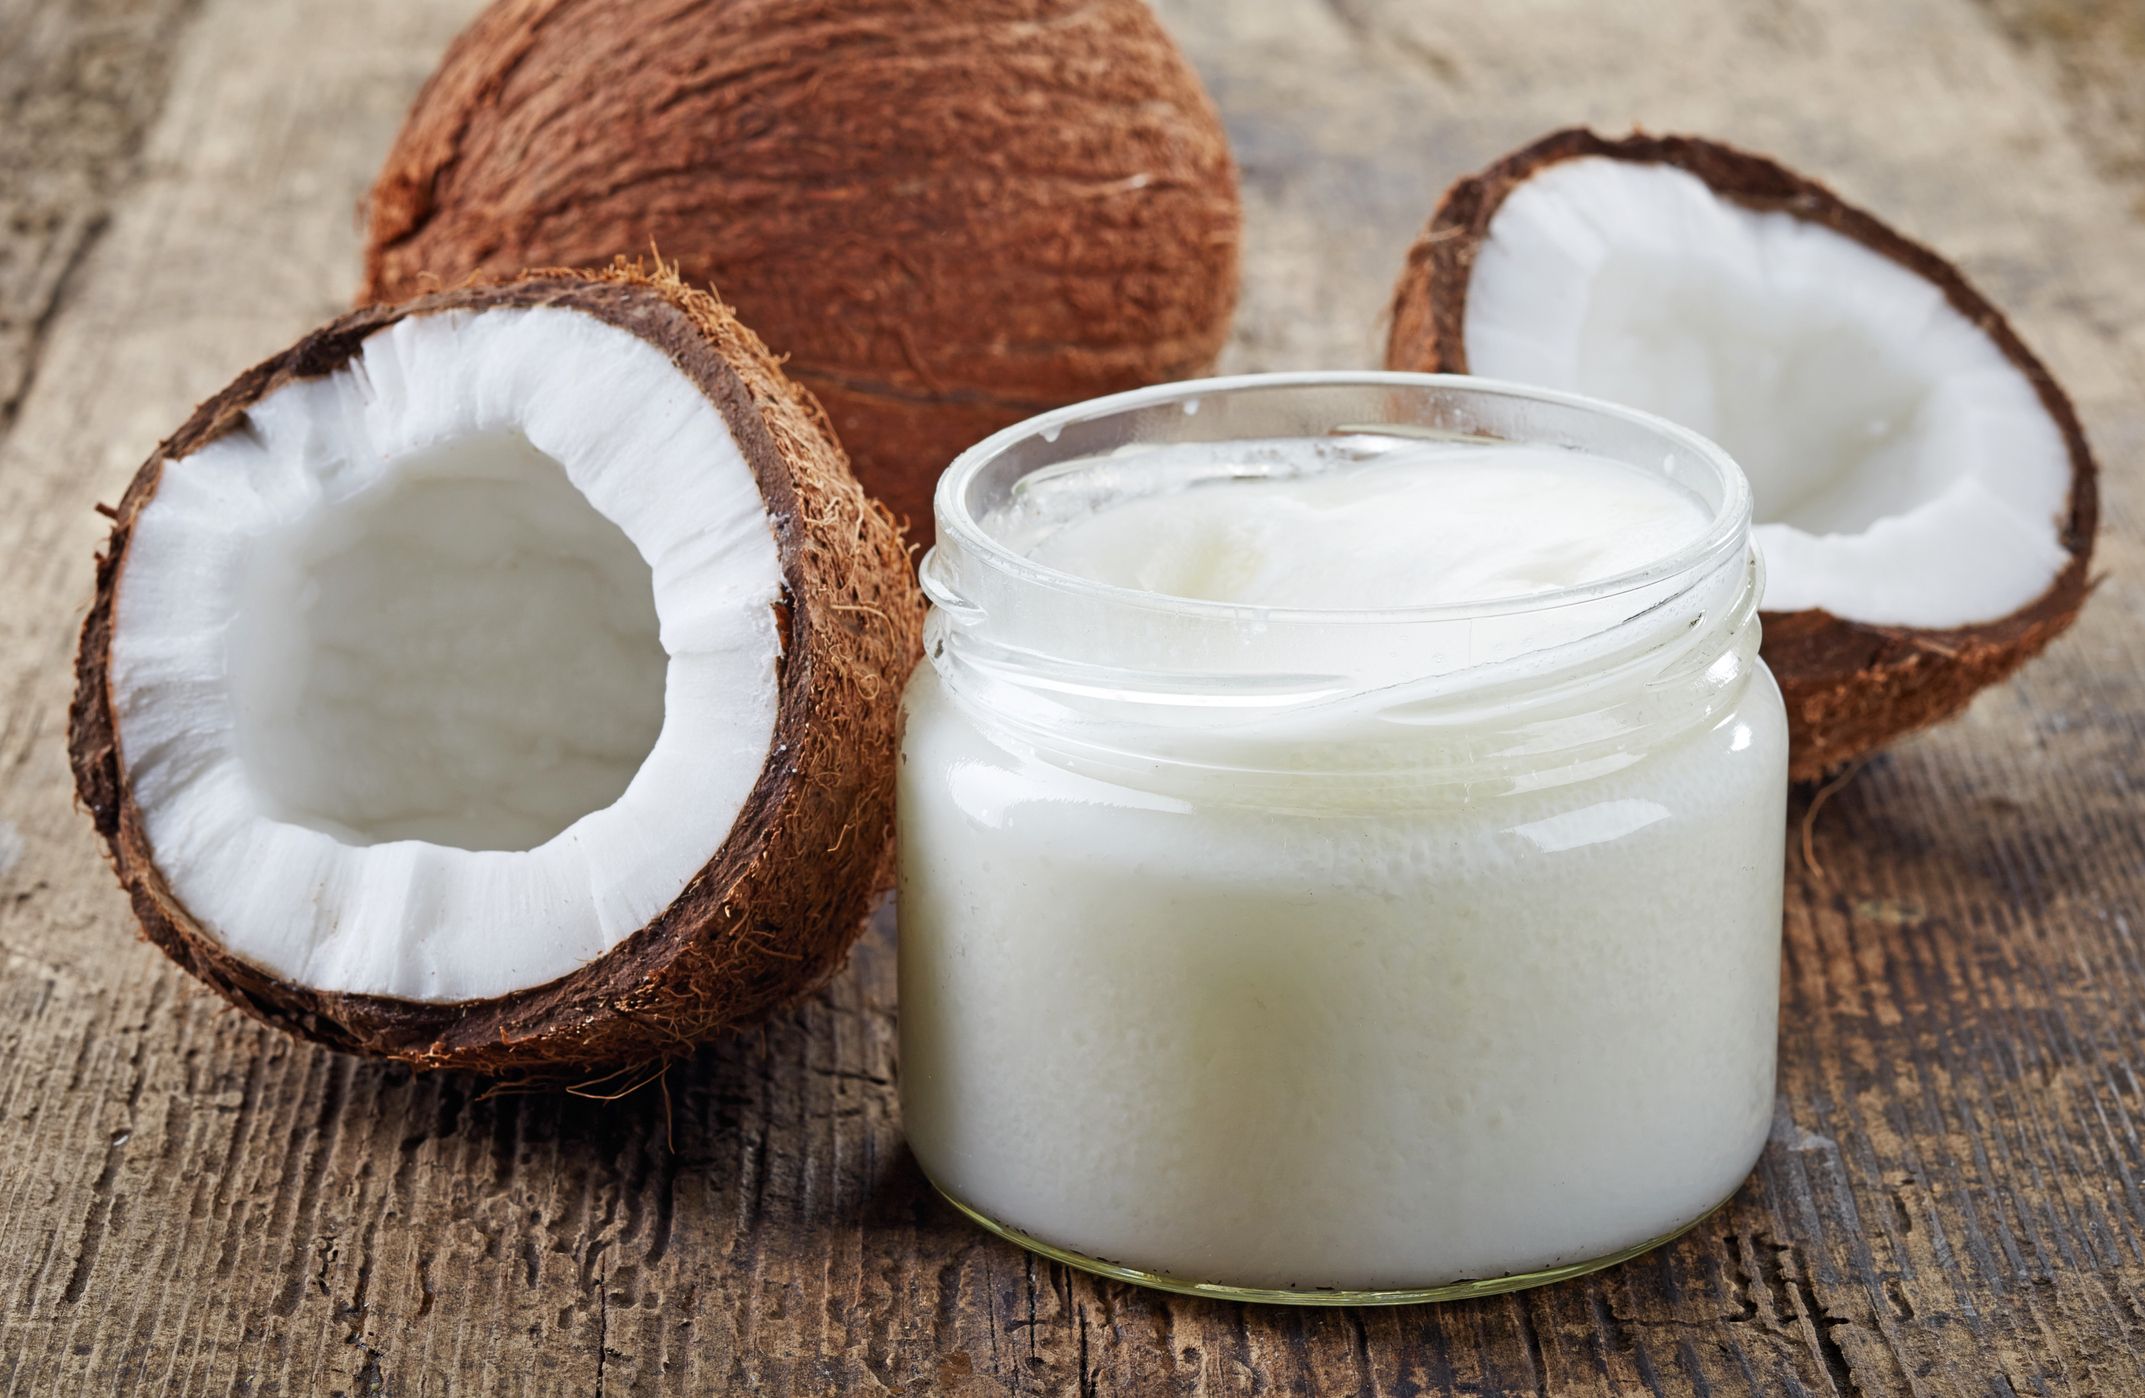 Coconut Oil For Anal Lube